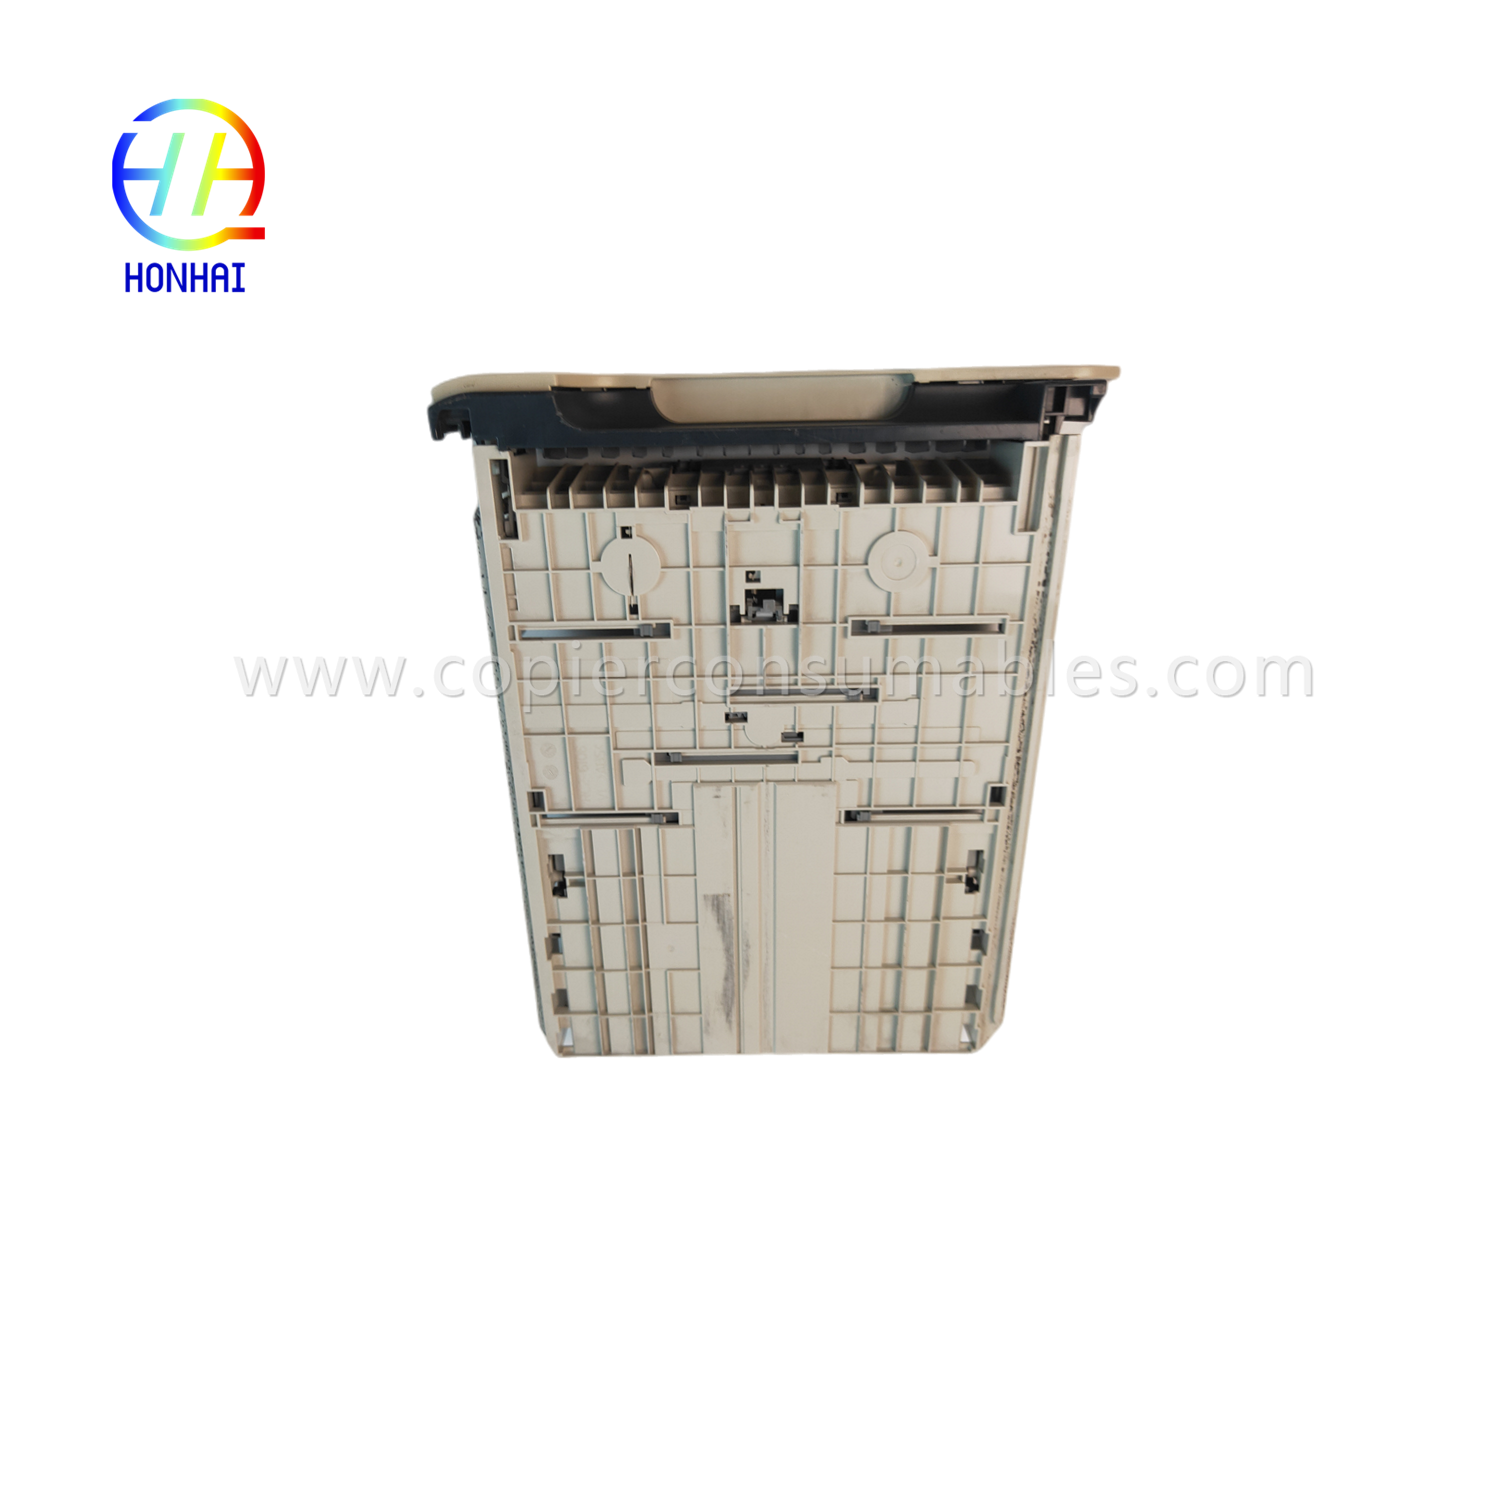 https://c585.goodo.net/paper-tray-for-hp-rc2-6106-rc2-6106-p2035-p2055-printers-product/